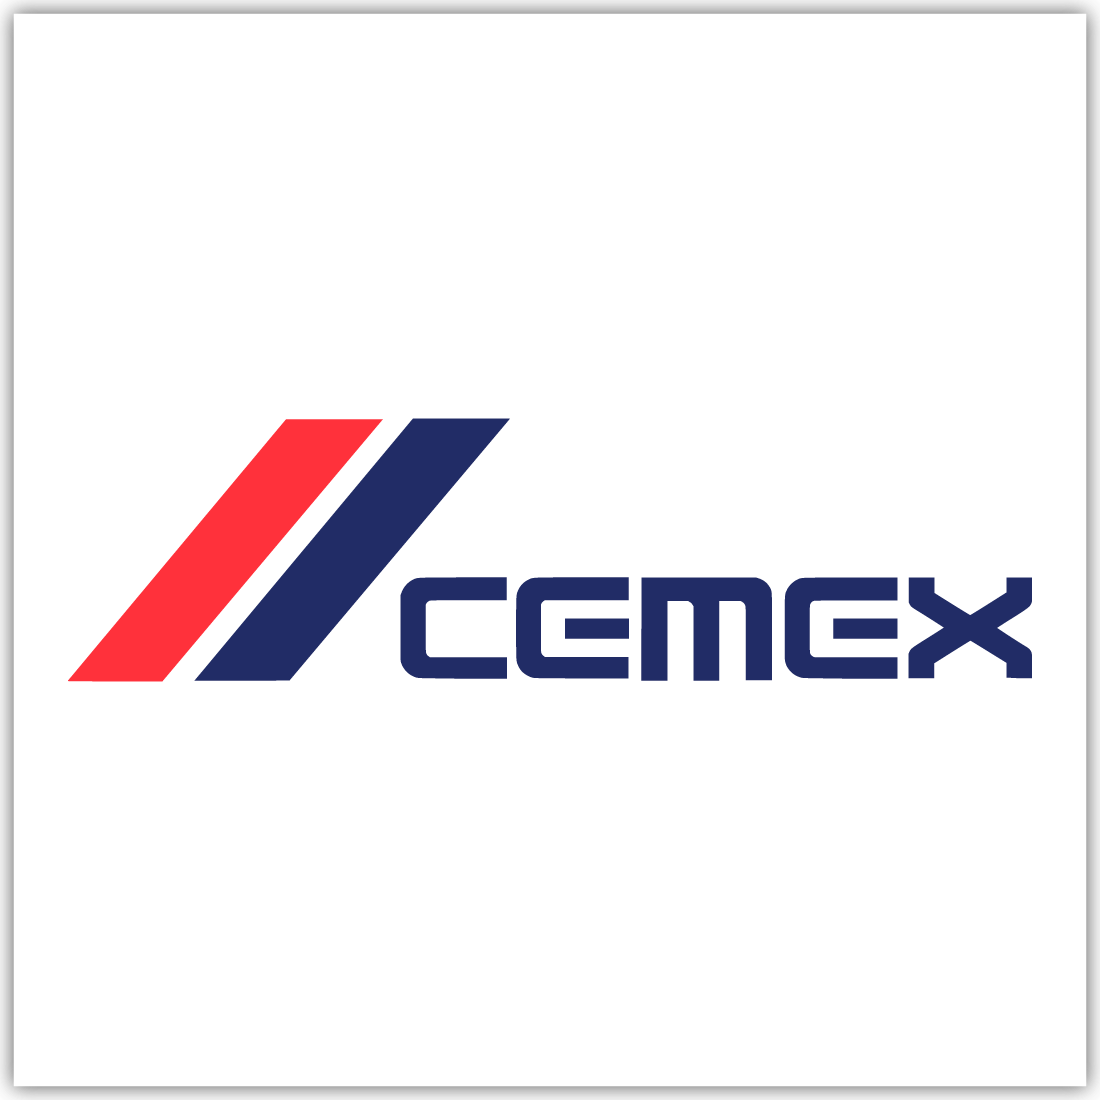 cemex.png